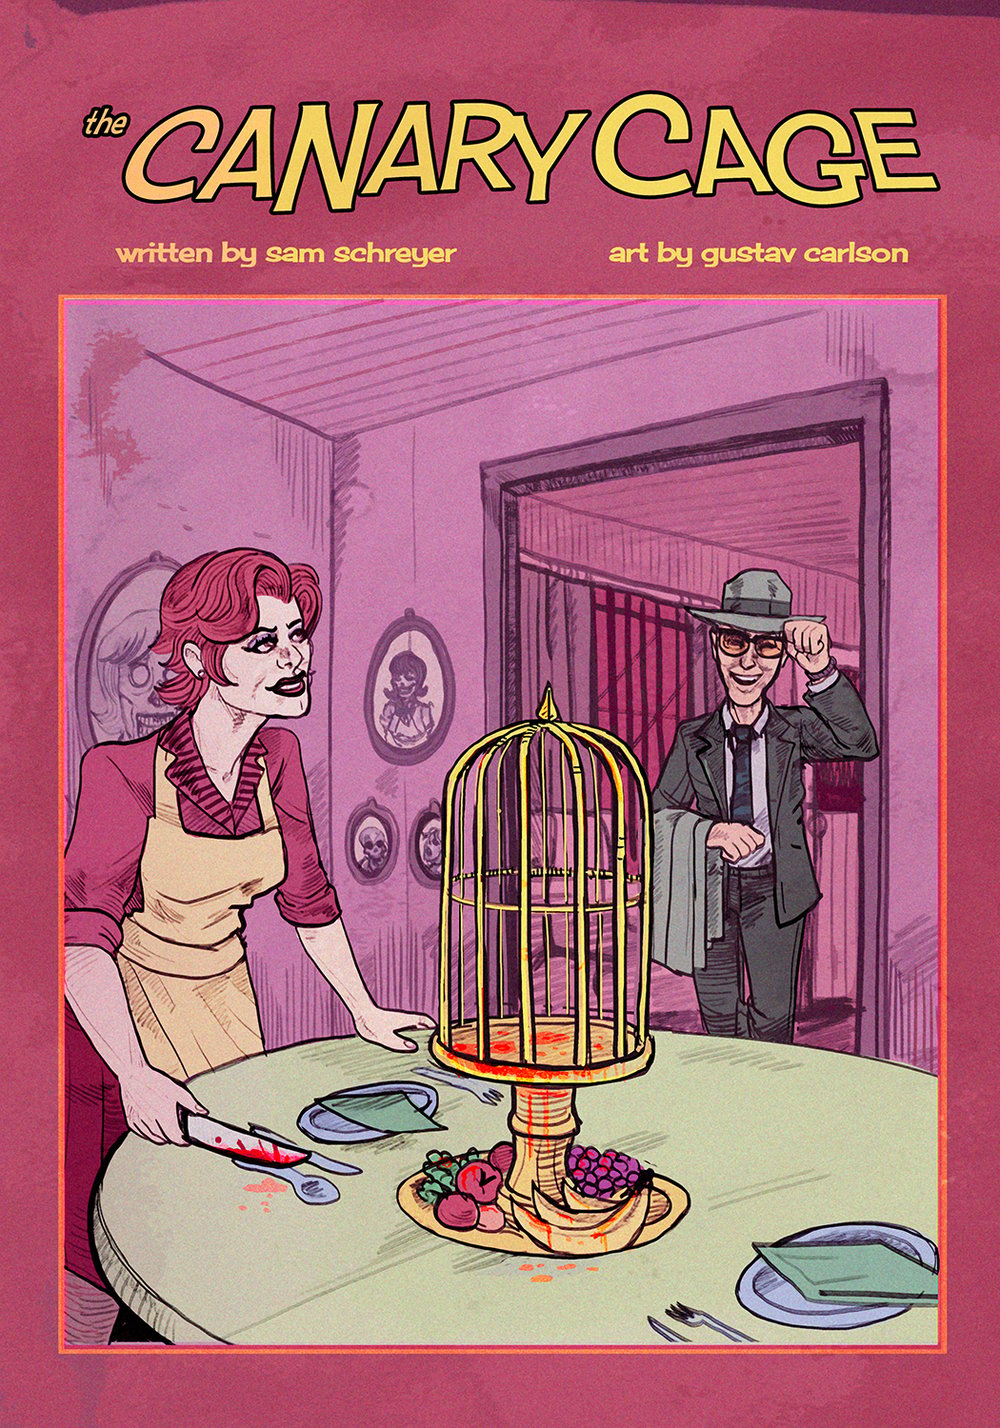 The Canary Cage